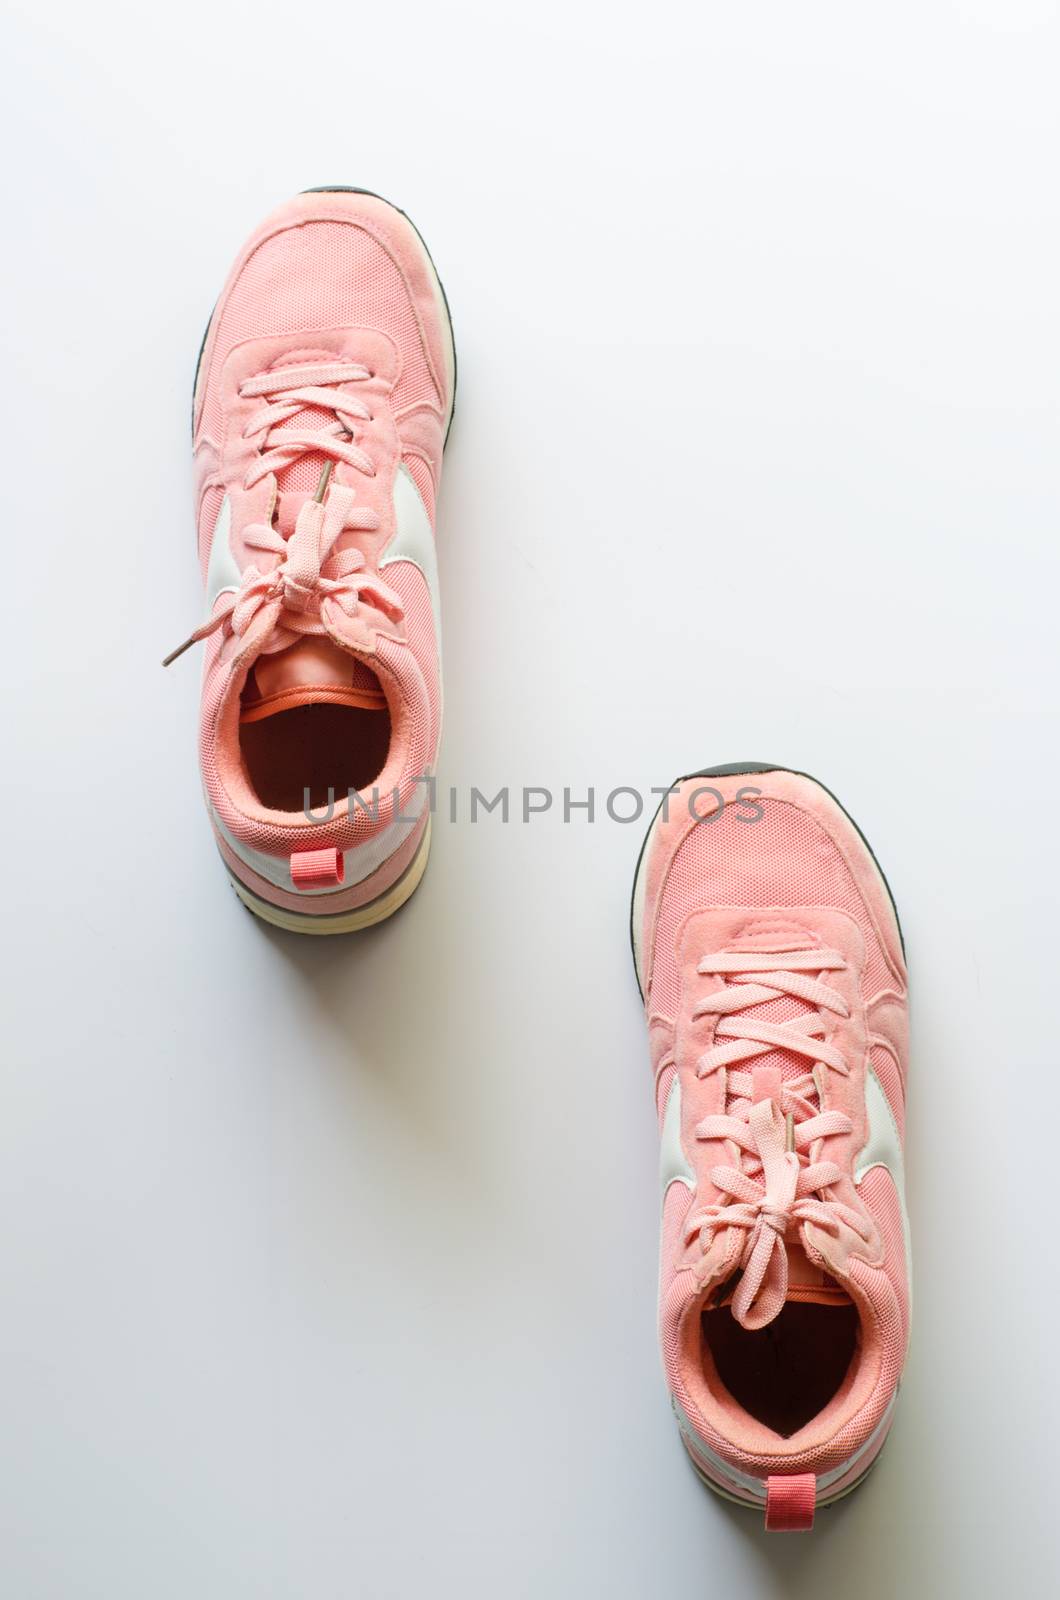 Pink sneakers on a white background, ready for jogging. by photobyphotoboy